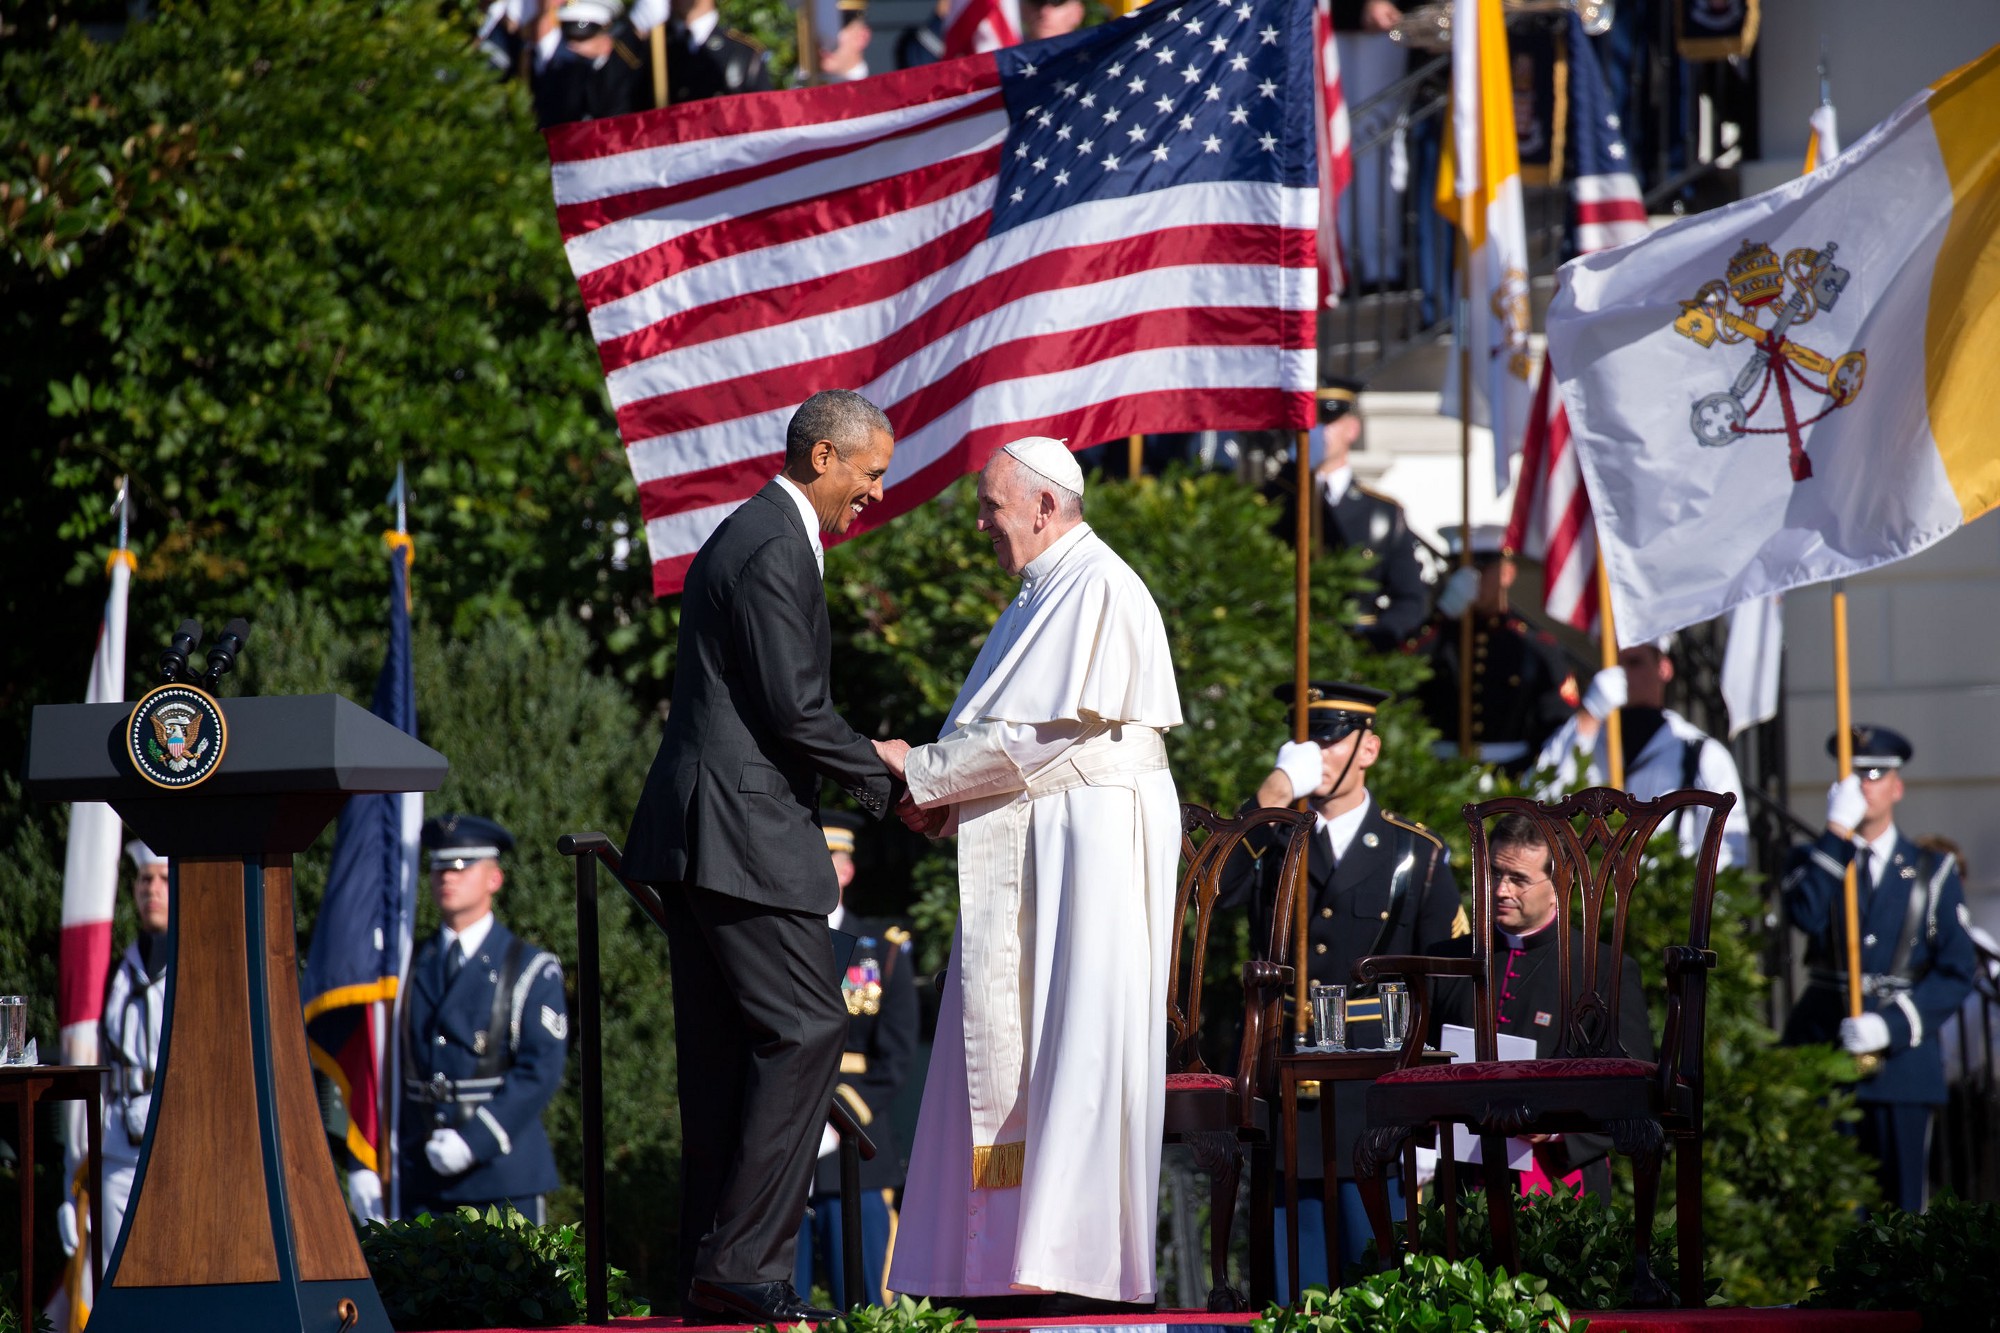 The President welcomes Pope Francis to the podium to speak. (Official White House Photo by Amanda Lucidon)